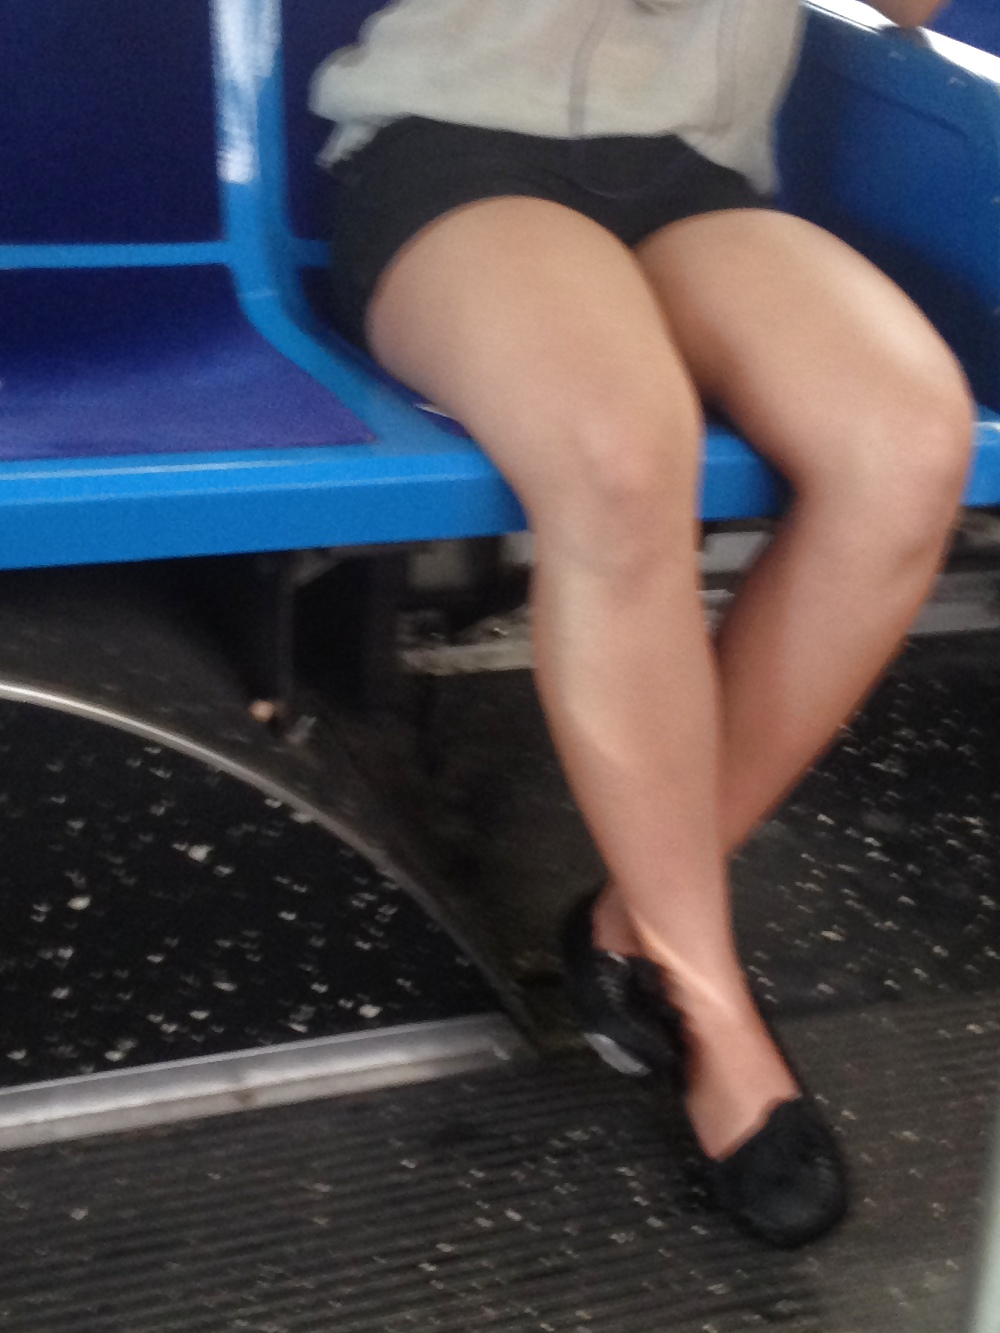 Just couldnt stop staring at her legs. #17542529